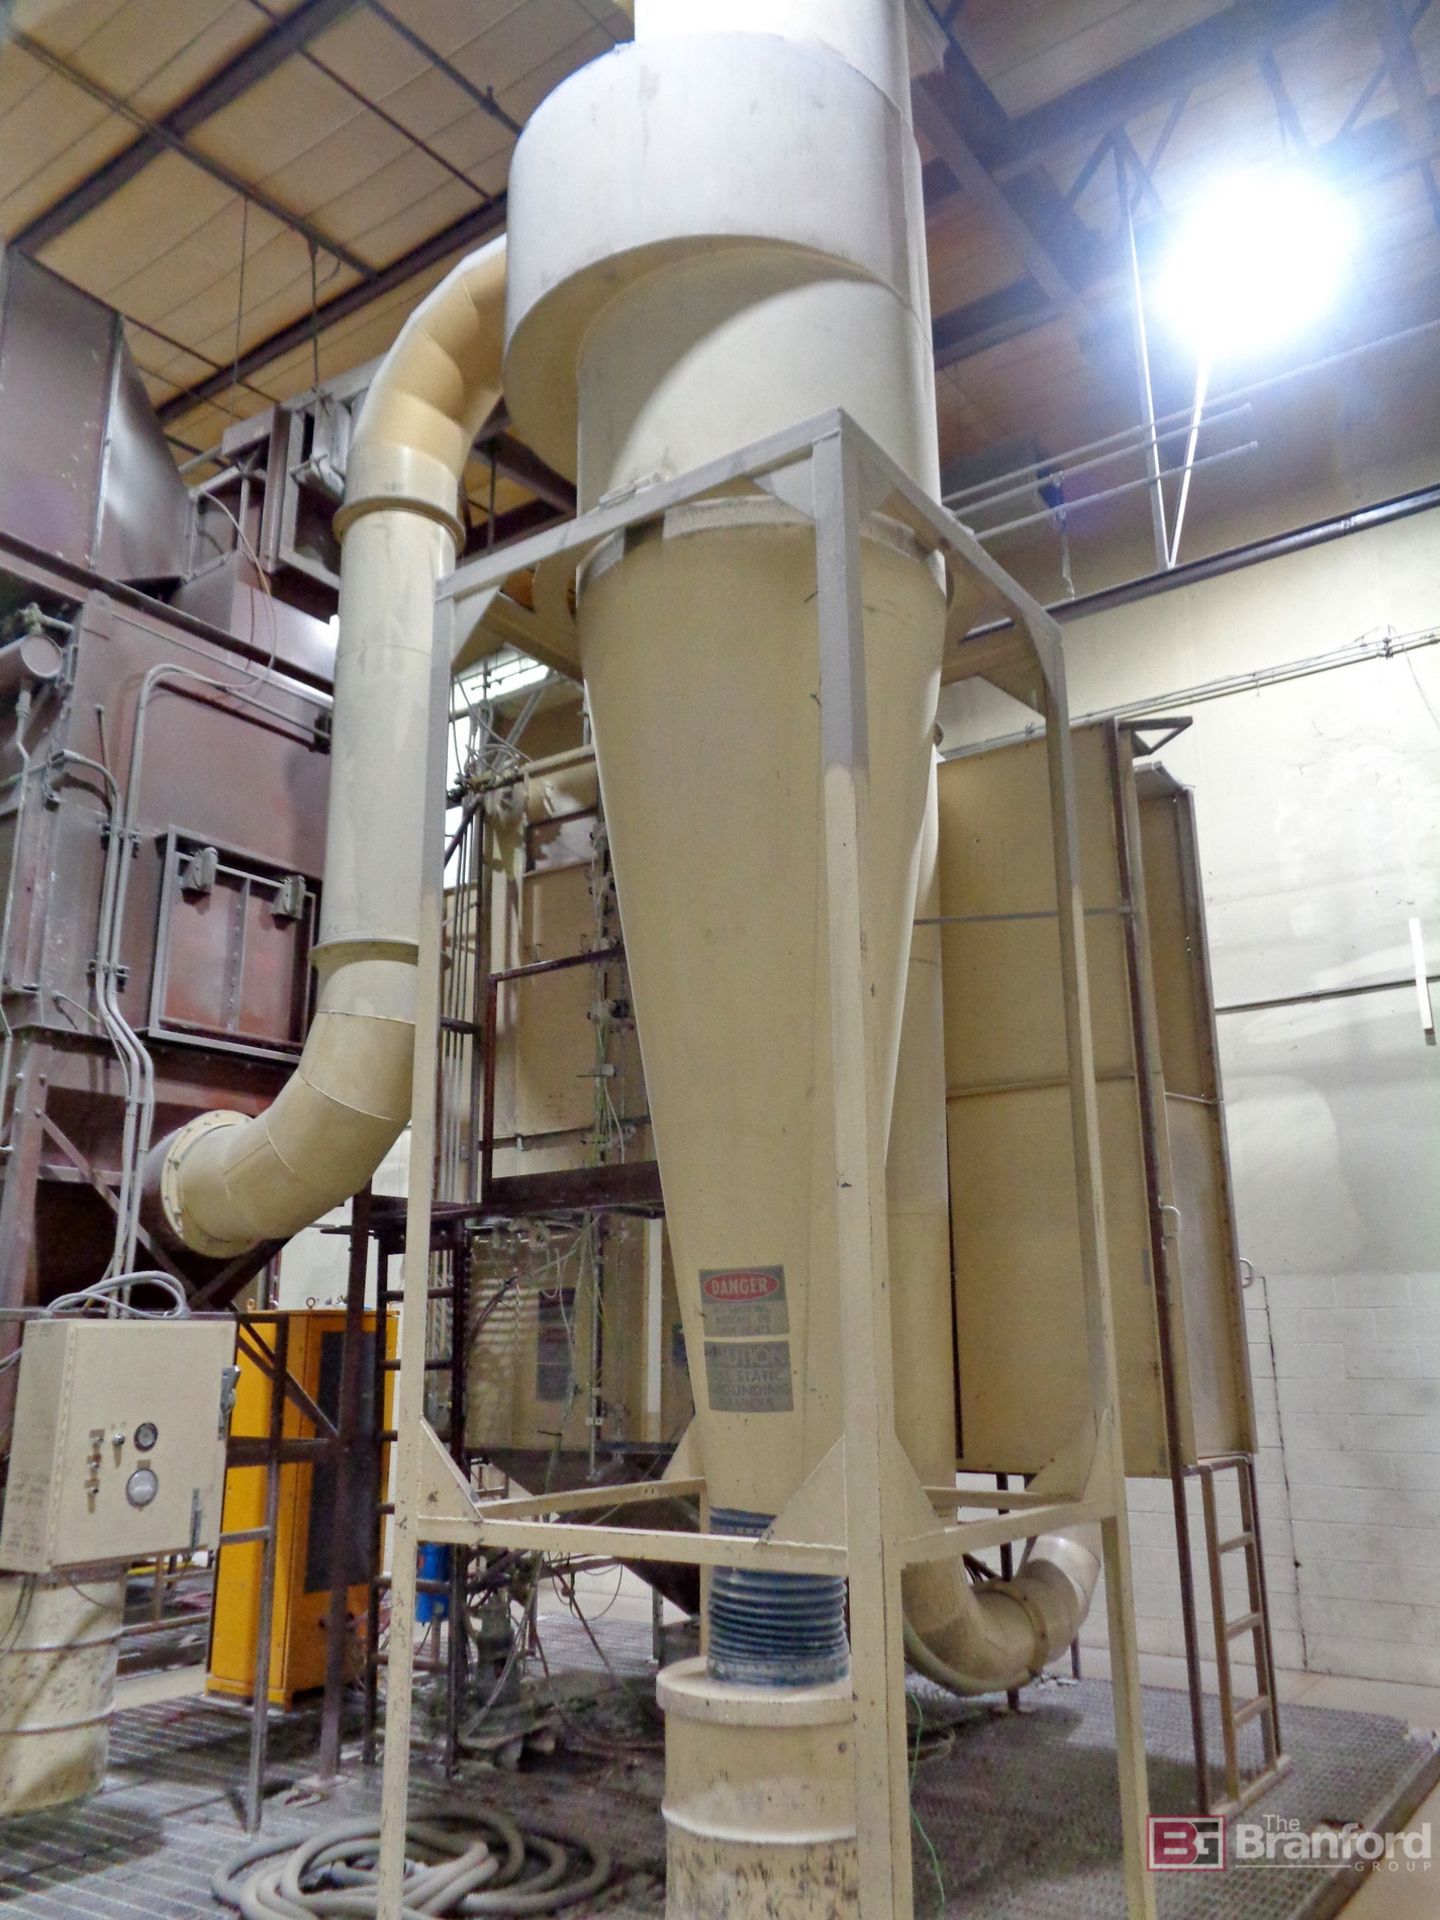 Thorid Automatic Powder Booth, Dust Collection, Cyclone System - Image 8 of 8